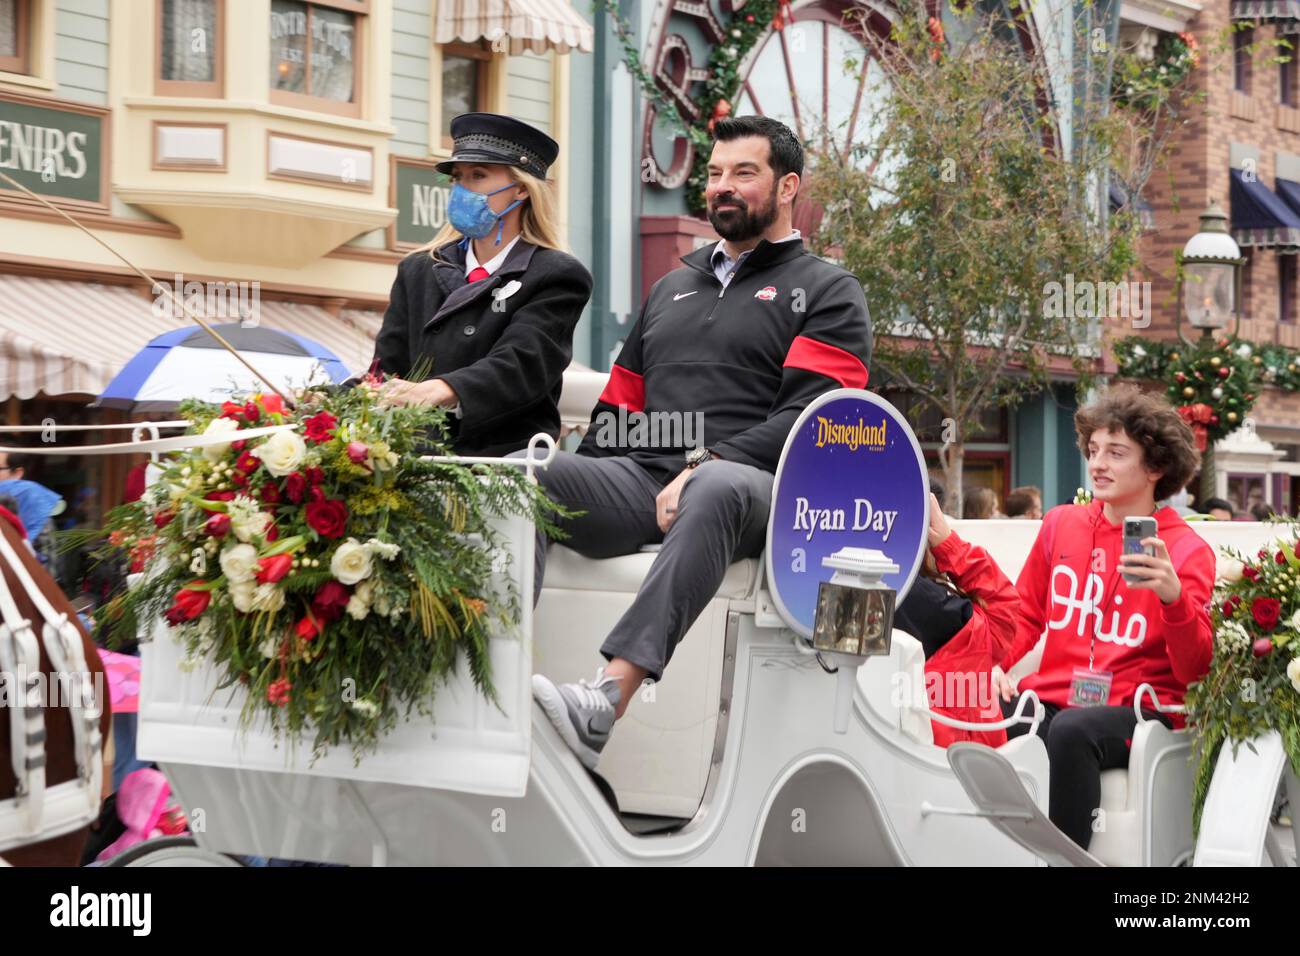 ohio-state-buckeys-coach-ryan-day-rides-in-a-carriage-during-rose-bowl-team-visit-at-disneyland-monday-dec-27-2021-in-anaheim-calif-kirby-lee-via-ap-2NM42H2.jpg